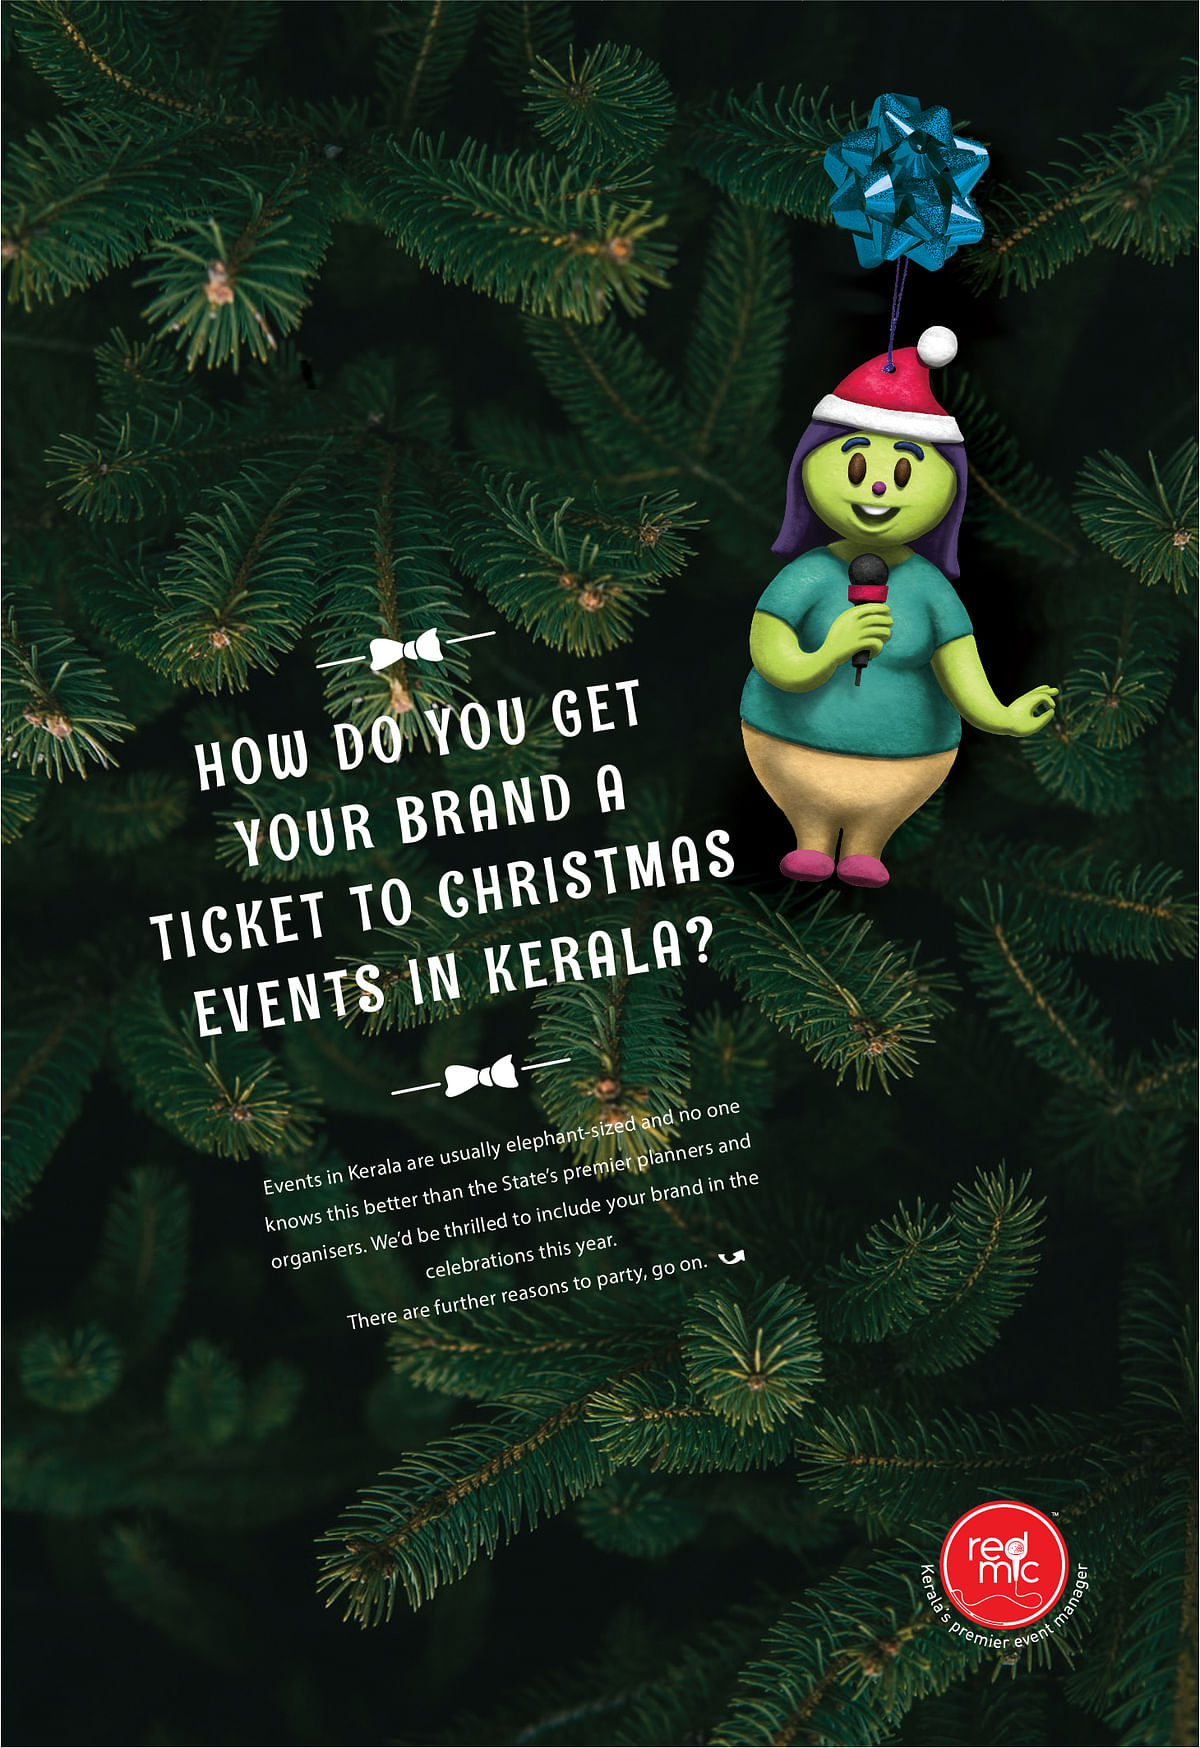 Mathrubhumi Christmas Campaign: Gift your brand an audience across Kerala and your friend a surprise this Christmas